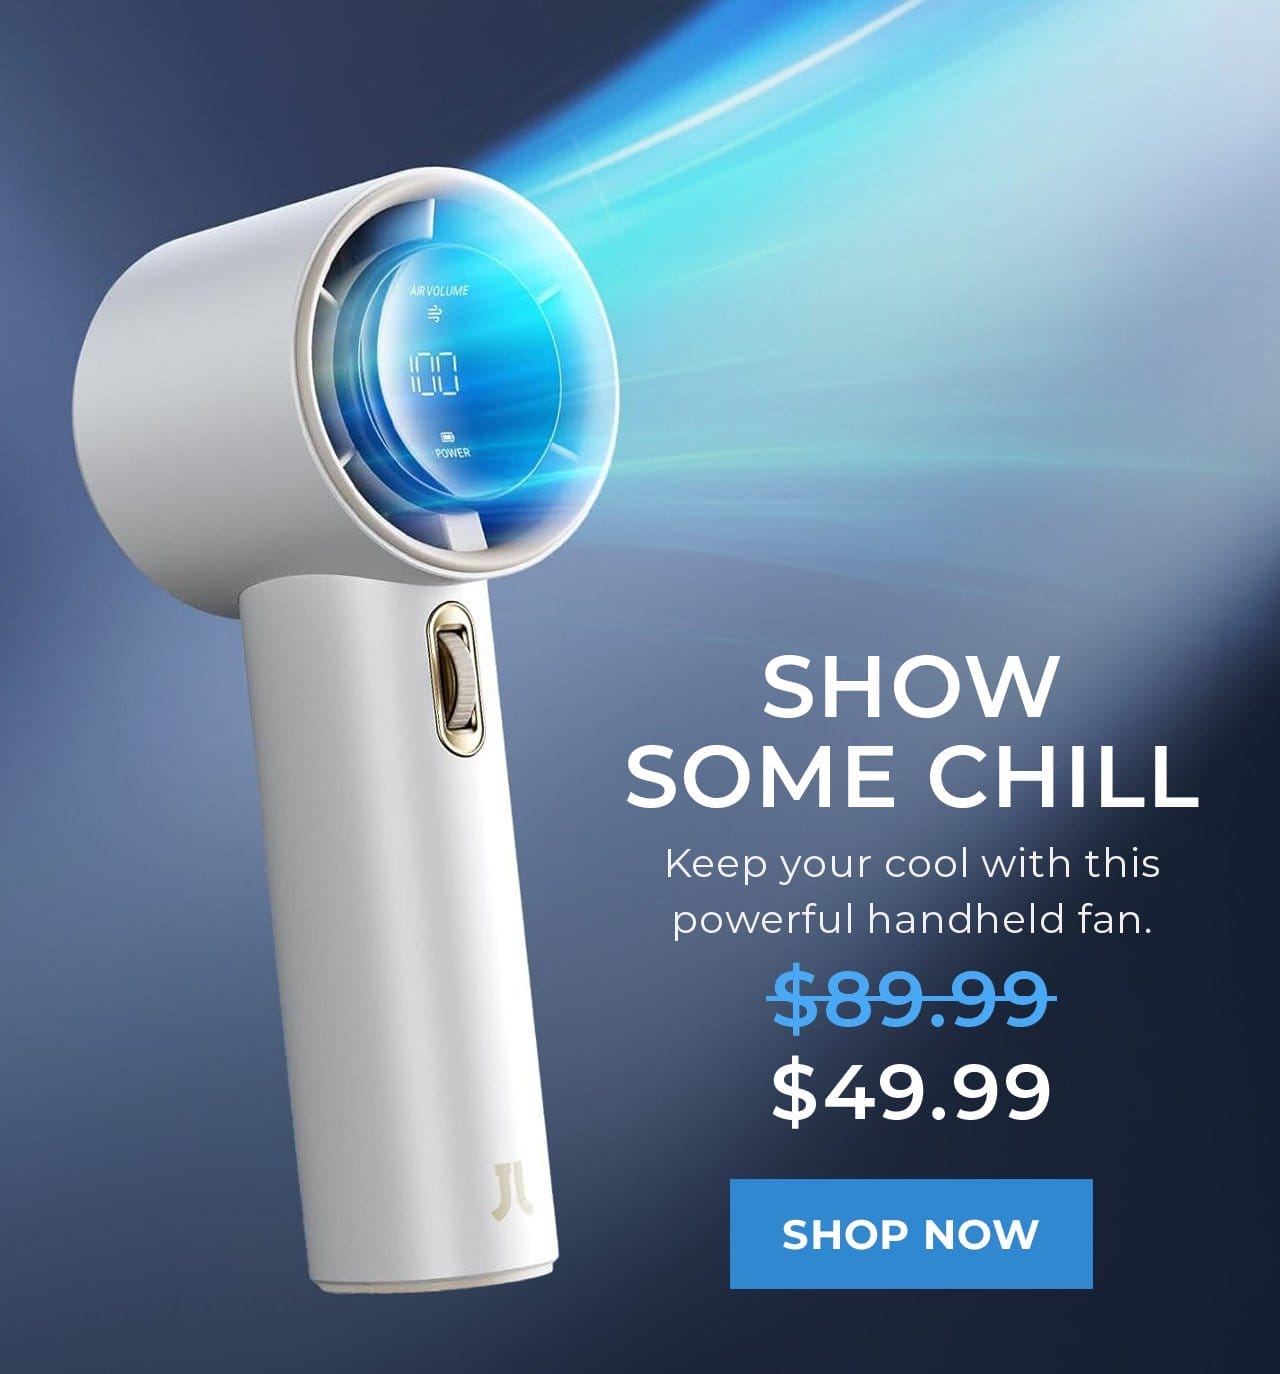 Powerful Handheld Fans | SHOP NOW